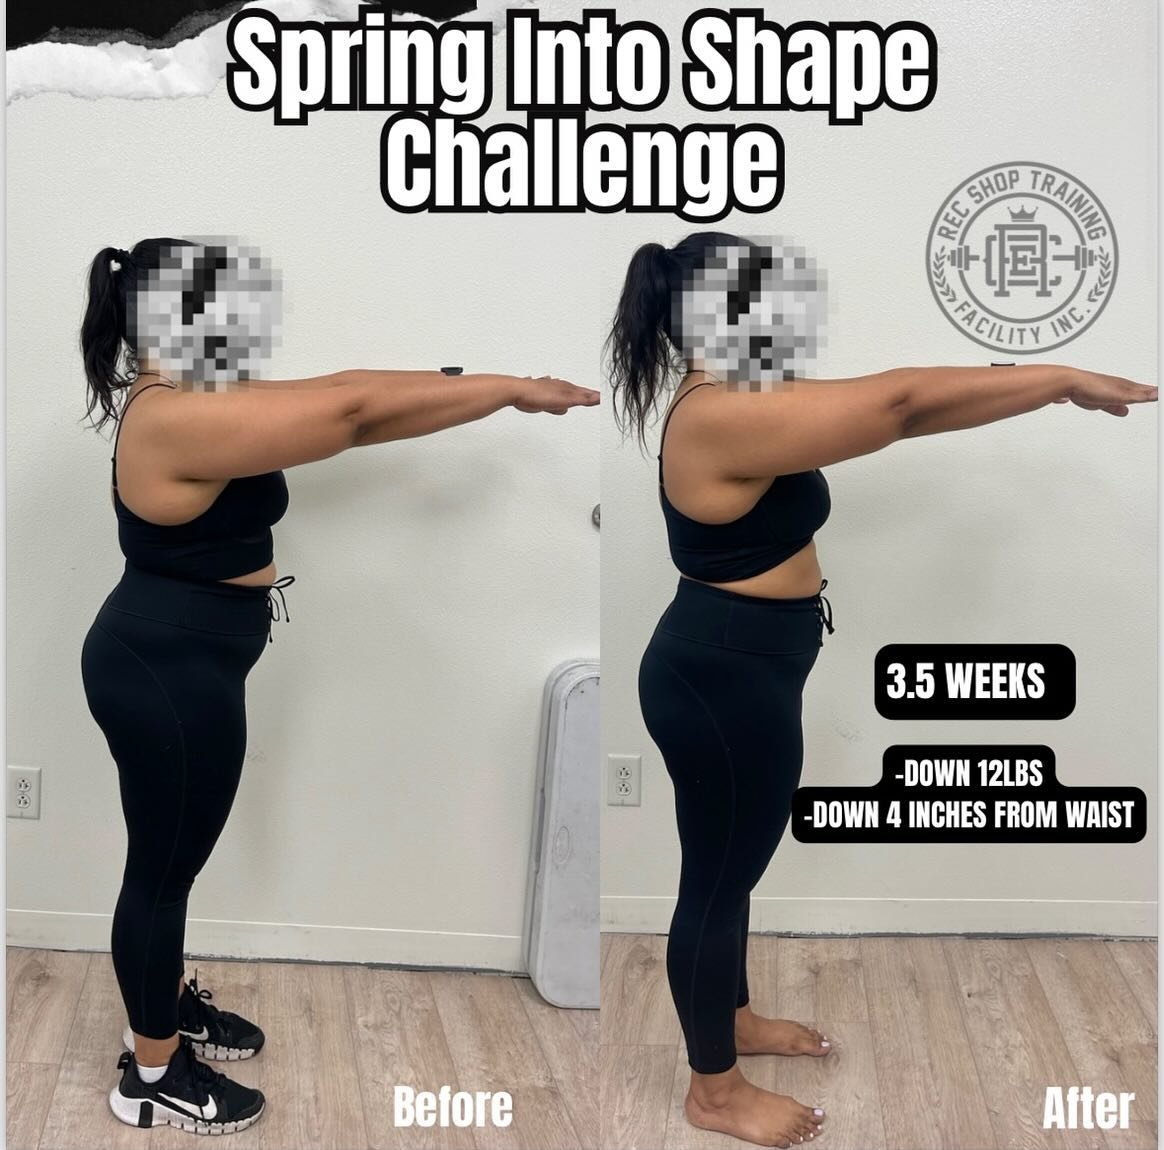 Huge shoutout to another member who absolutely crushed our Spring into Shape challenge, losing 12 pounds and 4 inches from the waist! Your hard work and dedication are truly inspiring, and we&rsquo;re so proud of you! 

We&rsquo;re also grateful for 